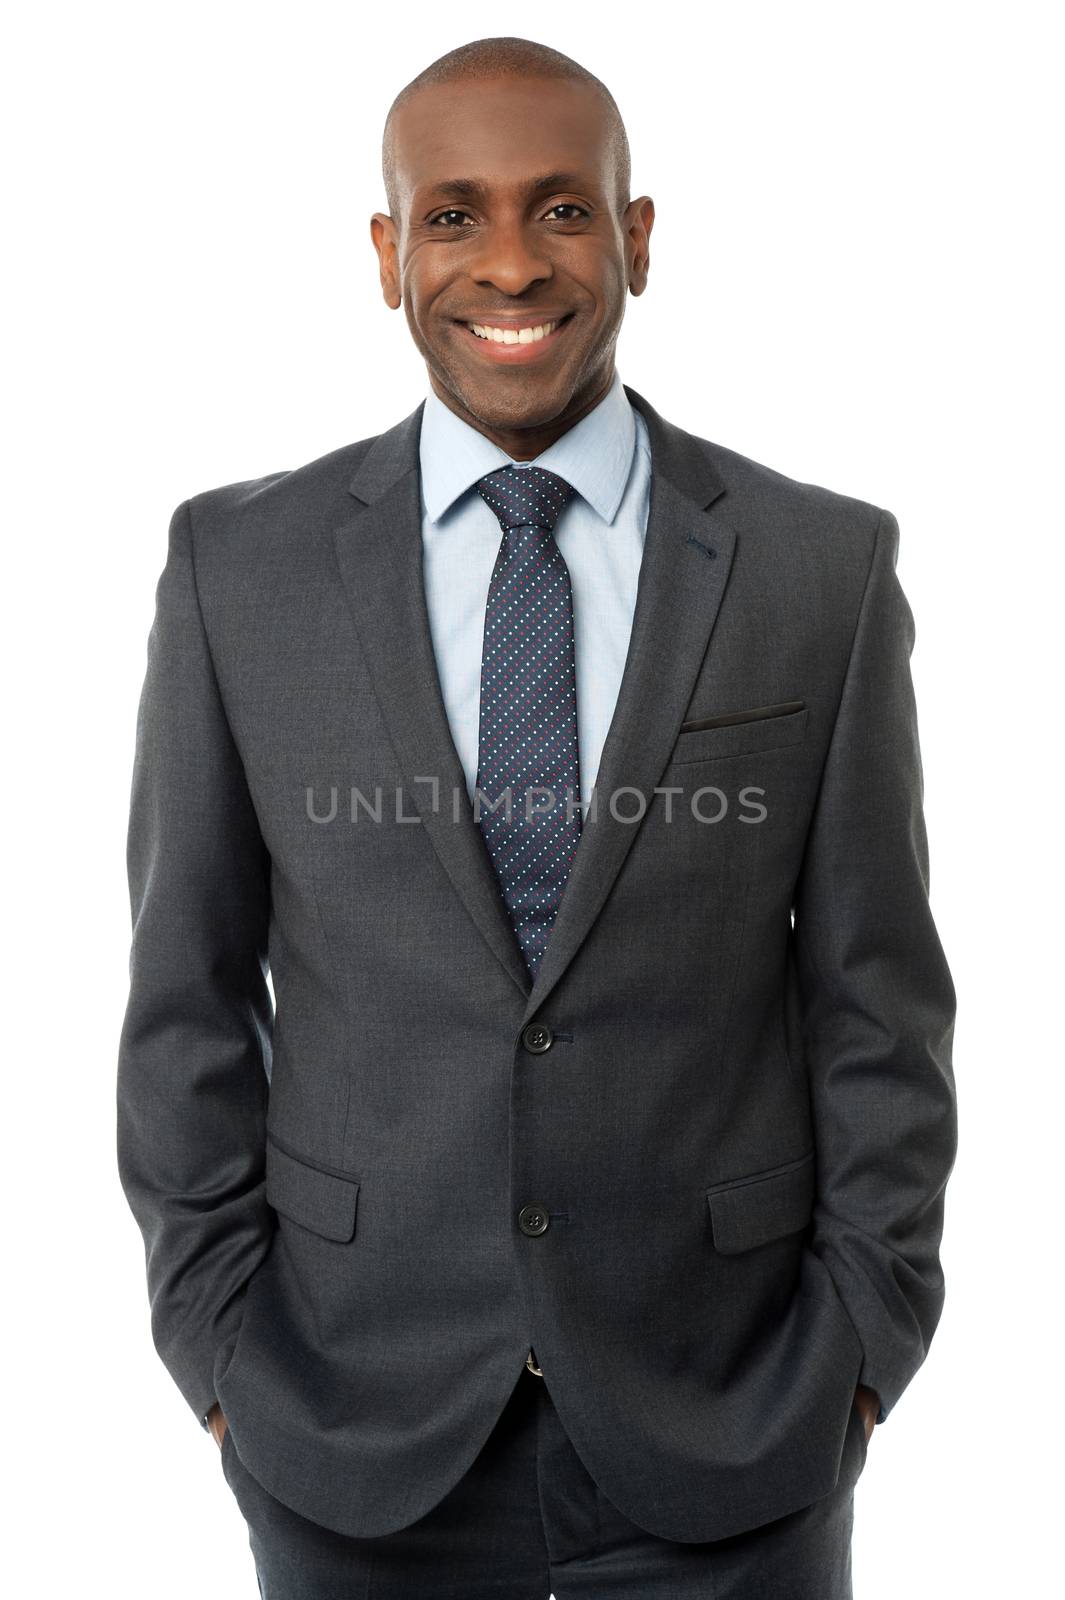 Male entrepreneur posing with his hands in pocket